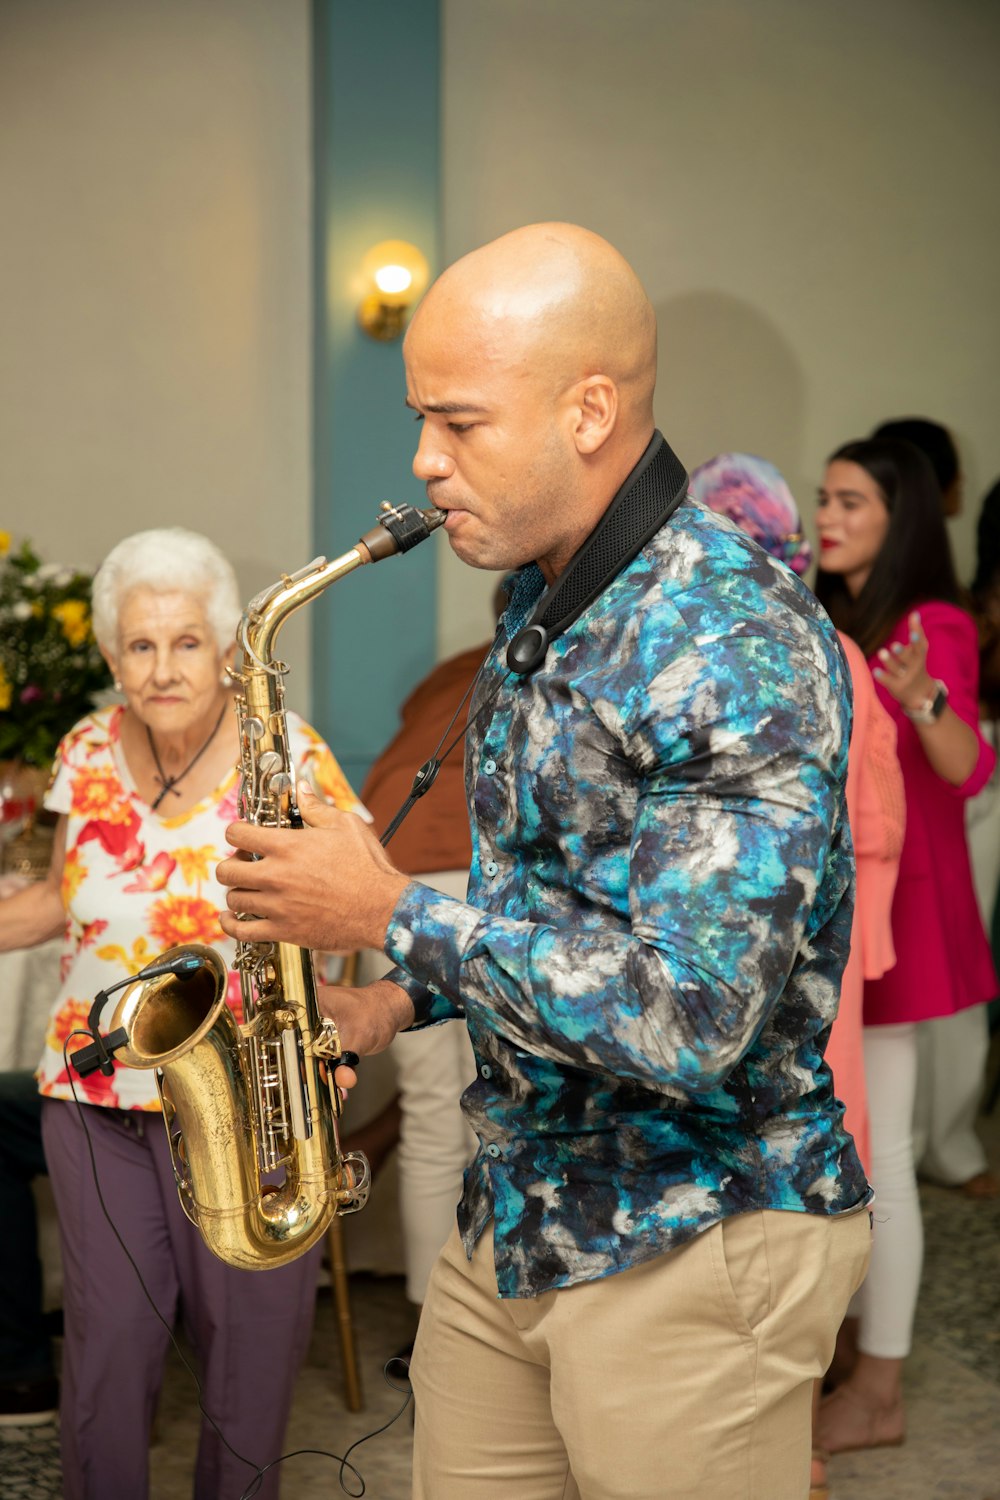 a man playing a saxophone in front of a group of people